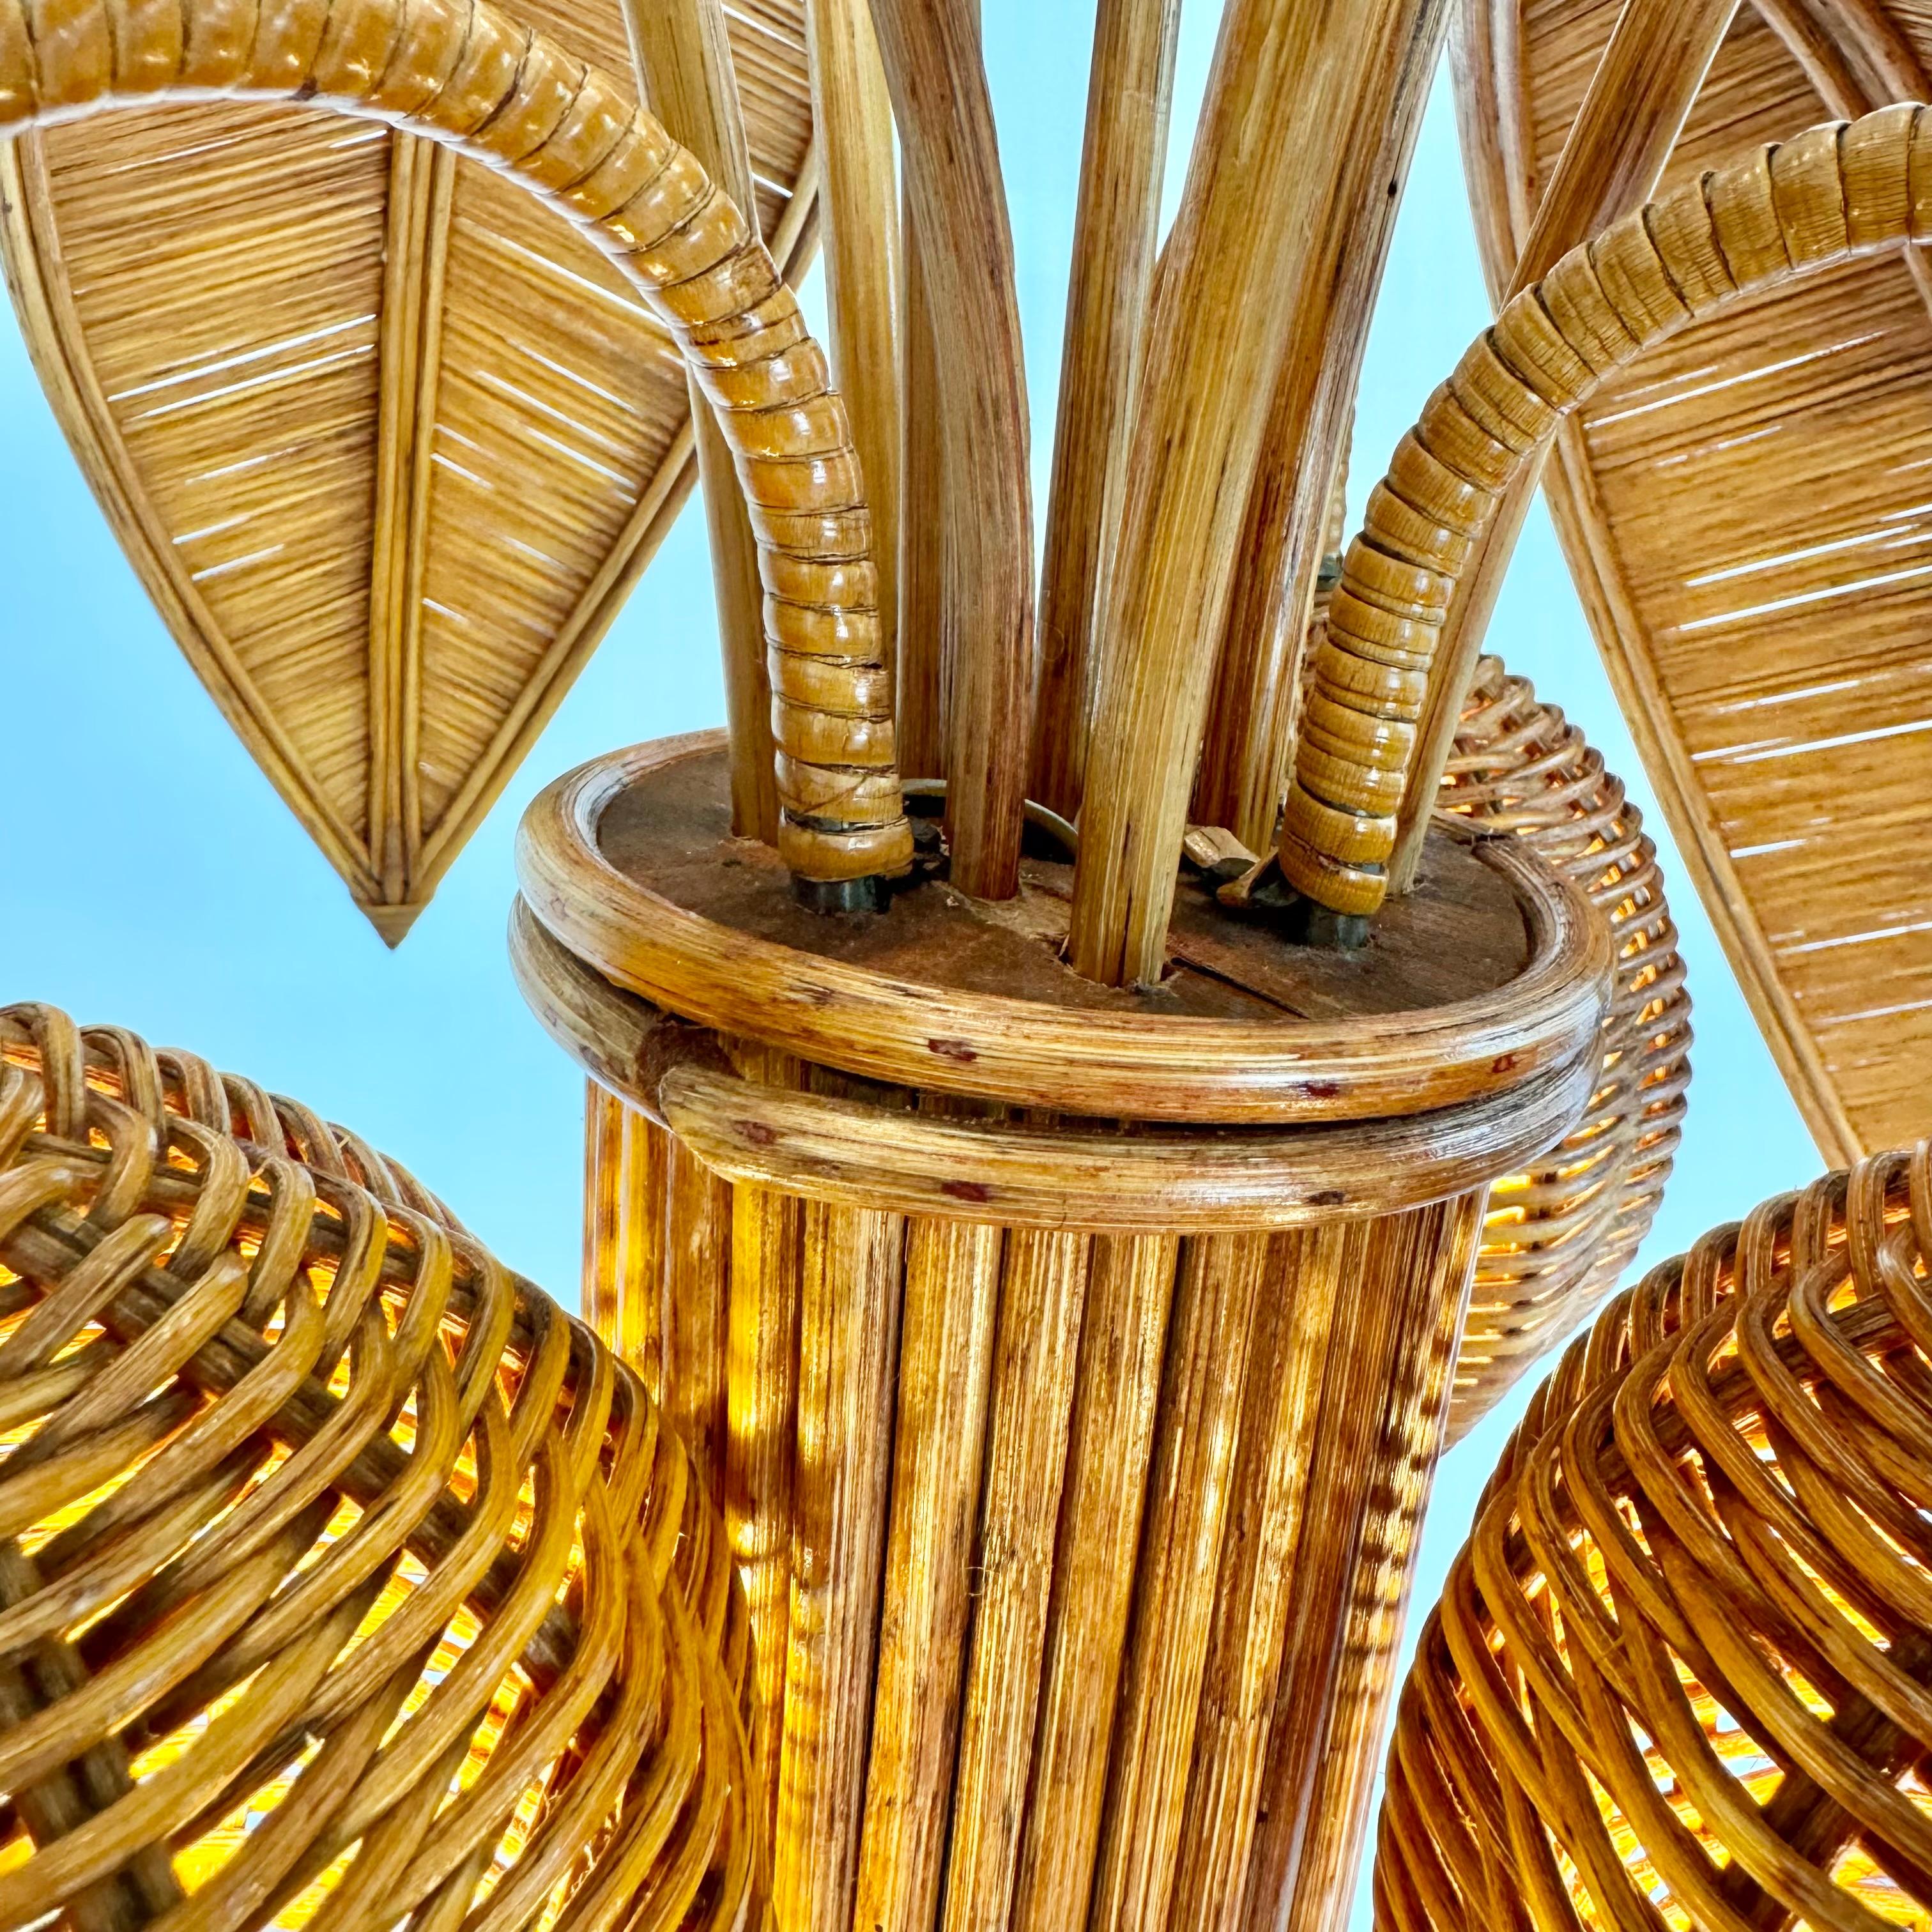 Rattan and Wicker Palm Tree Floor Lamp, 1970s United States For Sale 7